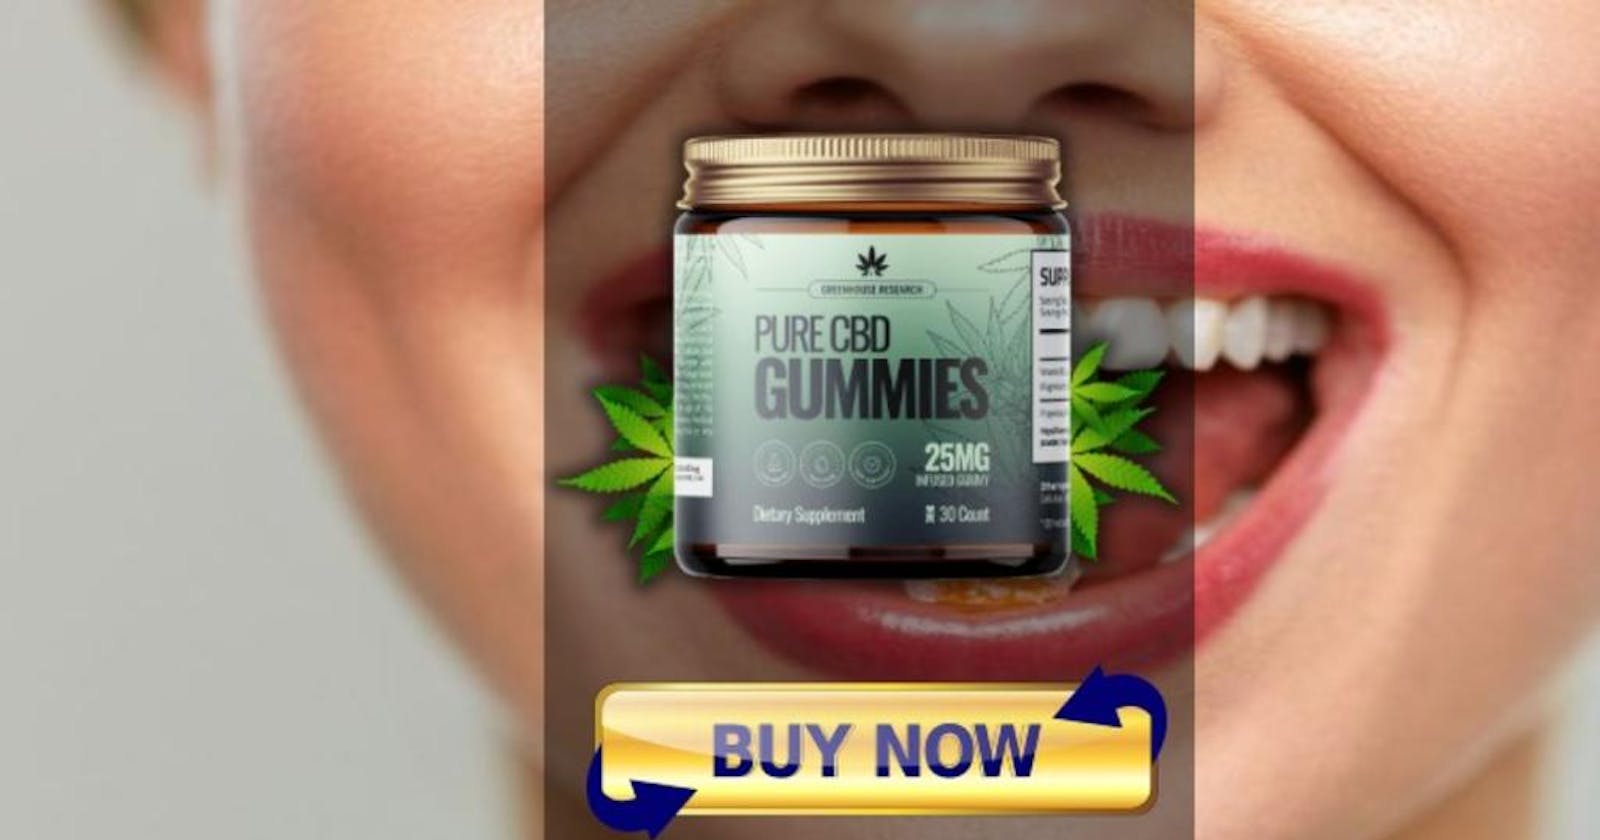 Tru Formula CBD Gummies THE MOST POPULAR CBD GUMMY BEARS IN UNITED STATES READ HERE REVIEWS, BENEFITS, SIDE EFFECT, INGREDIENTS, DOES IT REALLY WORK?